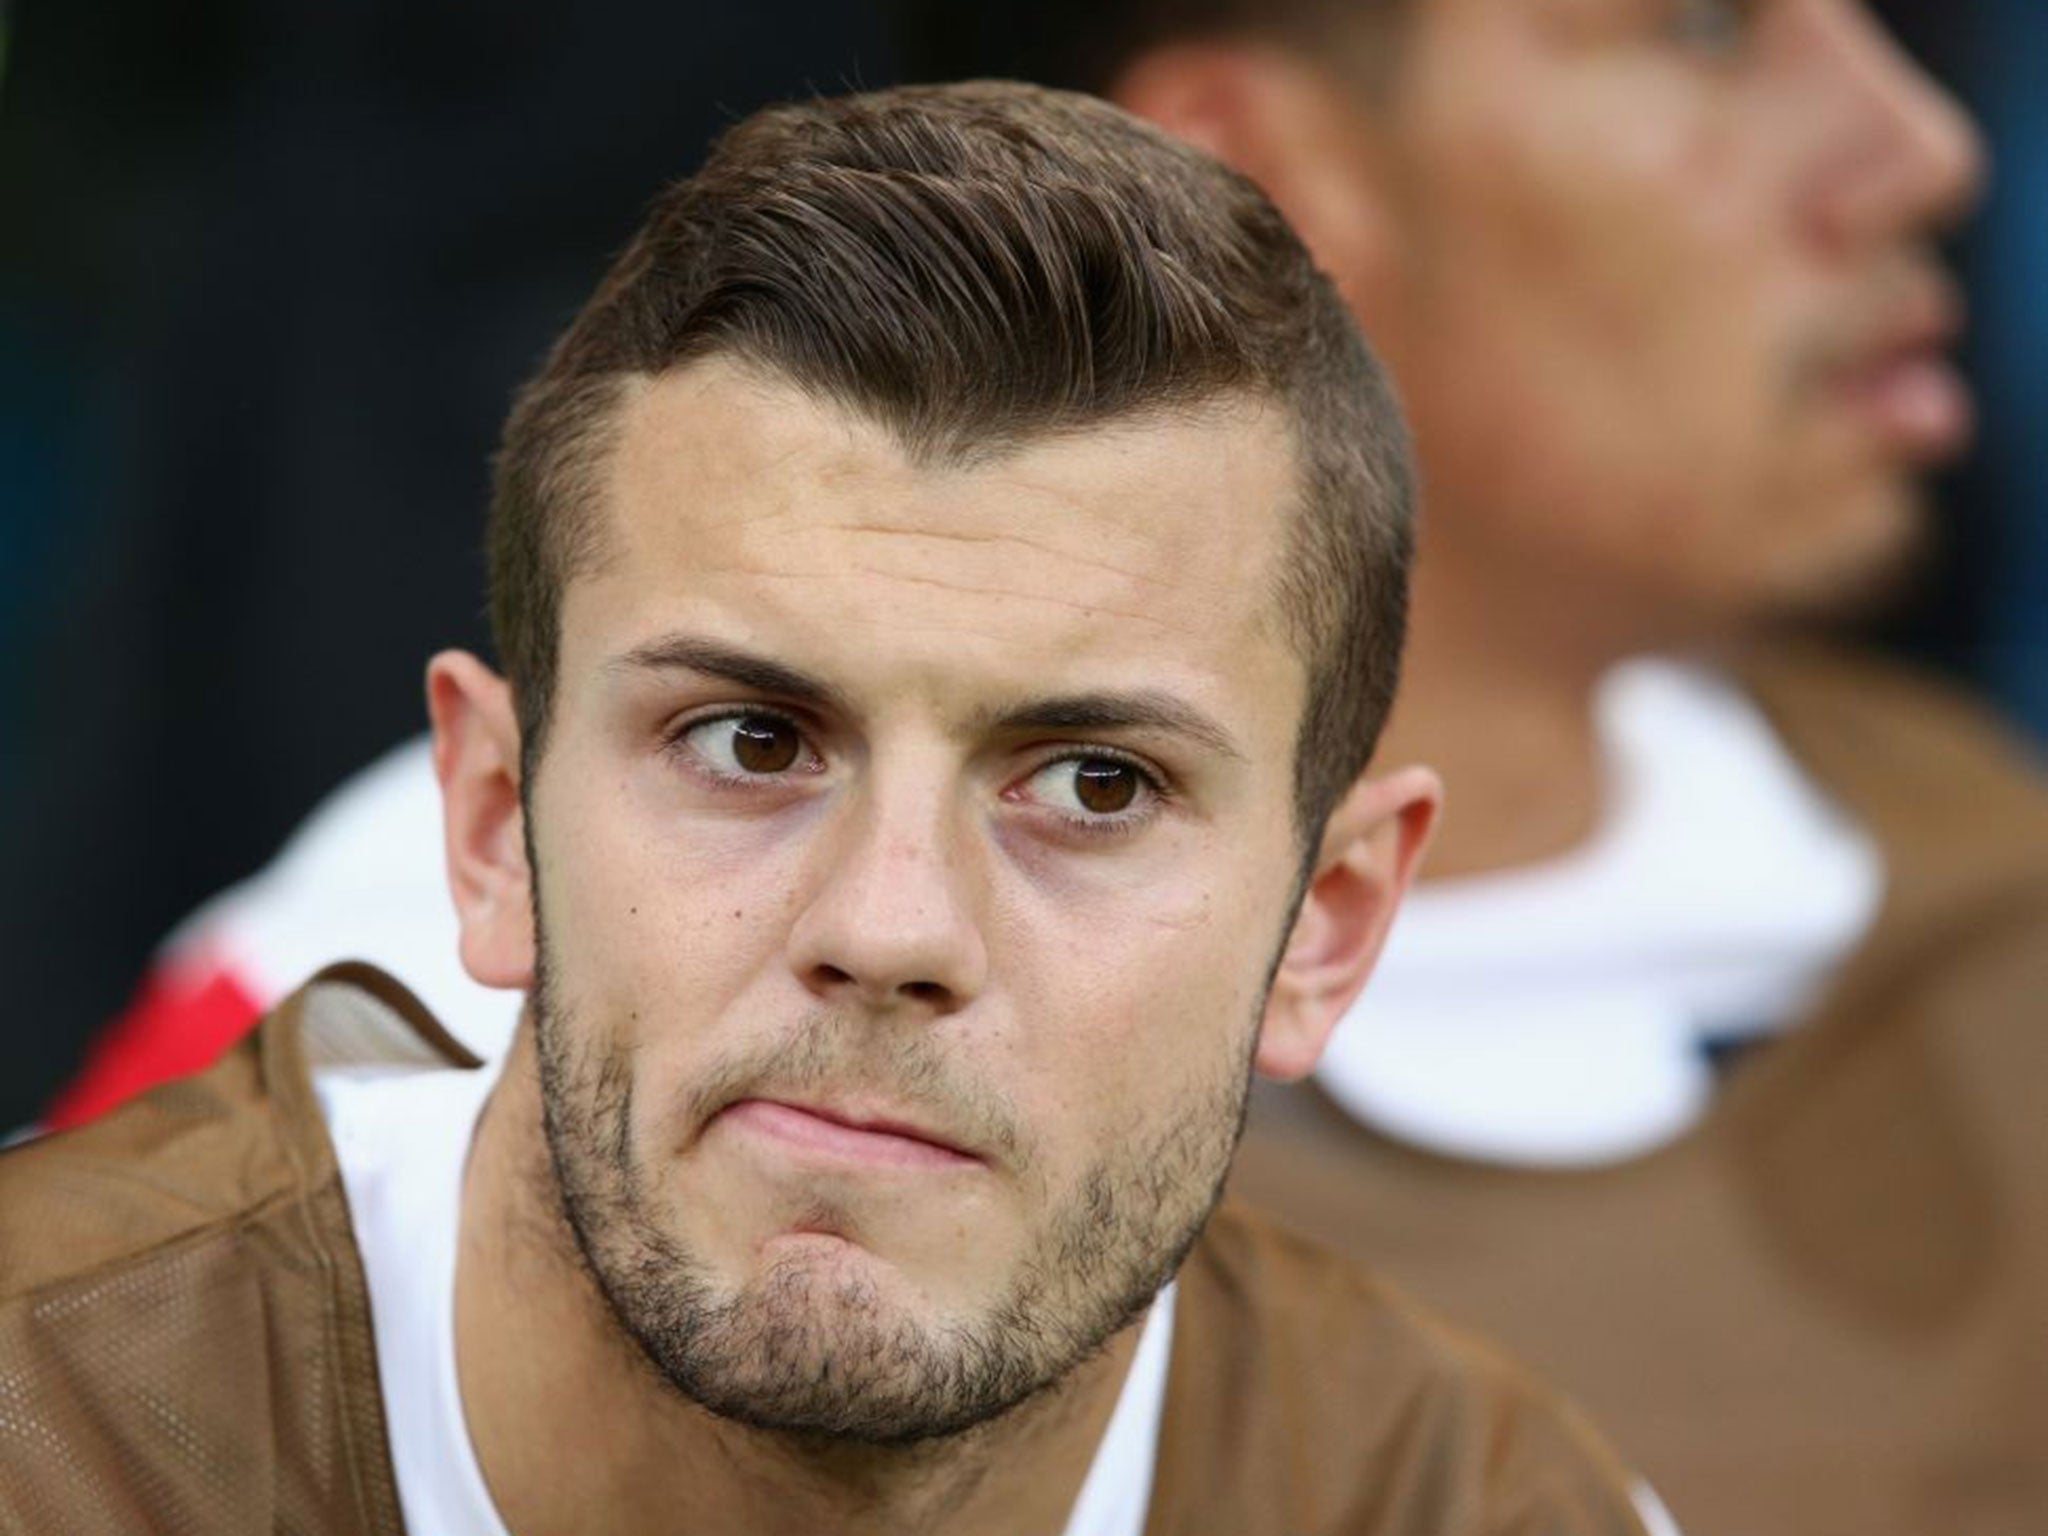 Wilshere faced criticism last season after he was pictured smoking